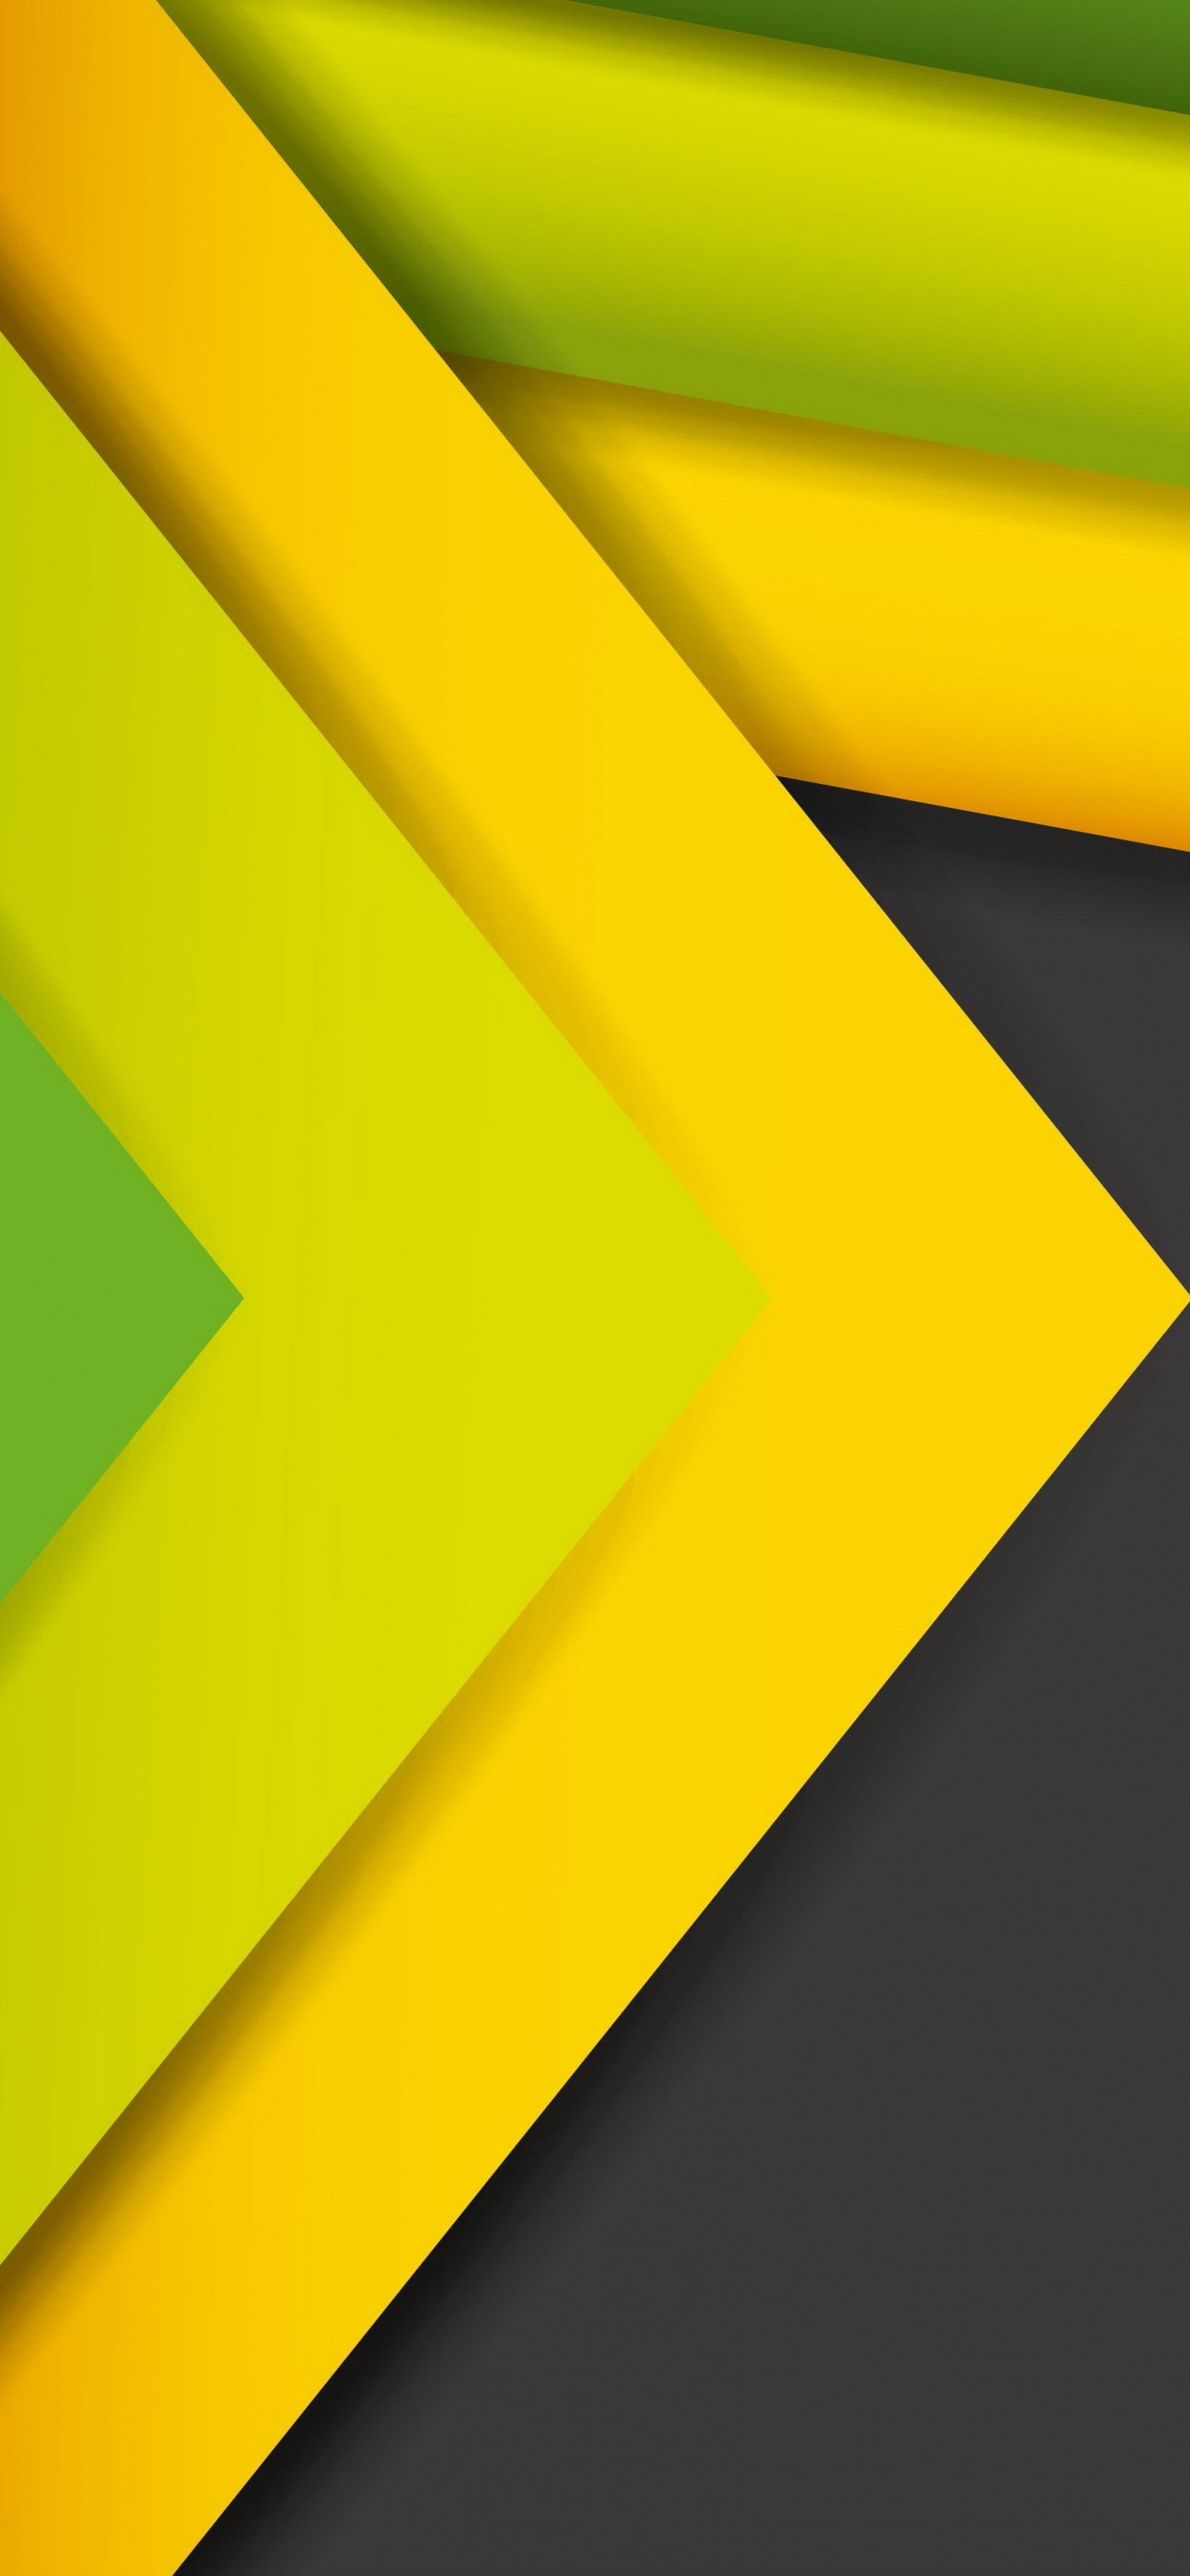 Yellow and Green Triangle Illustration. Wallpaper in 1242x2688 Resolution